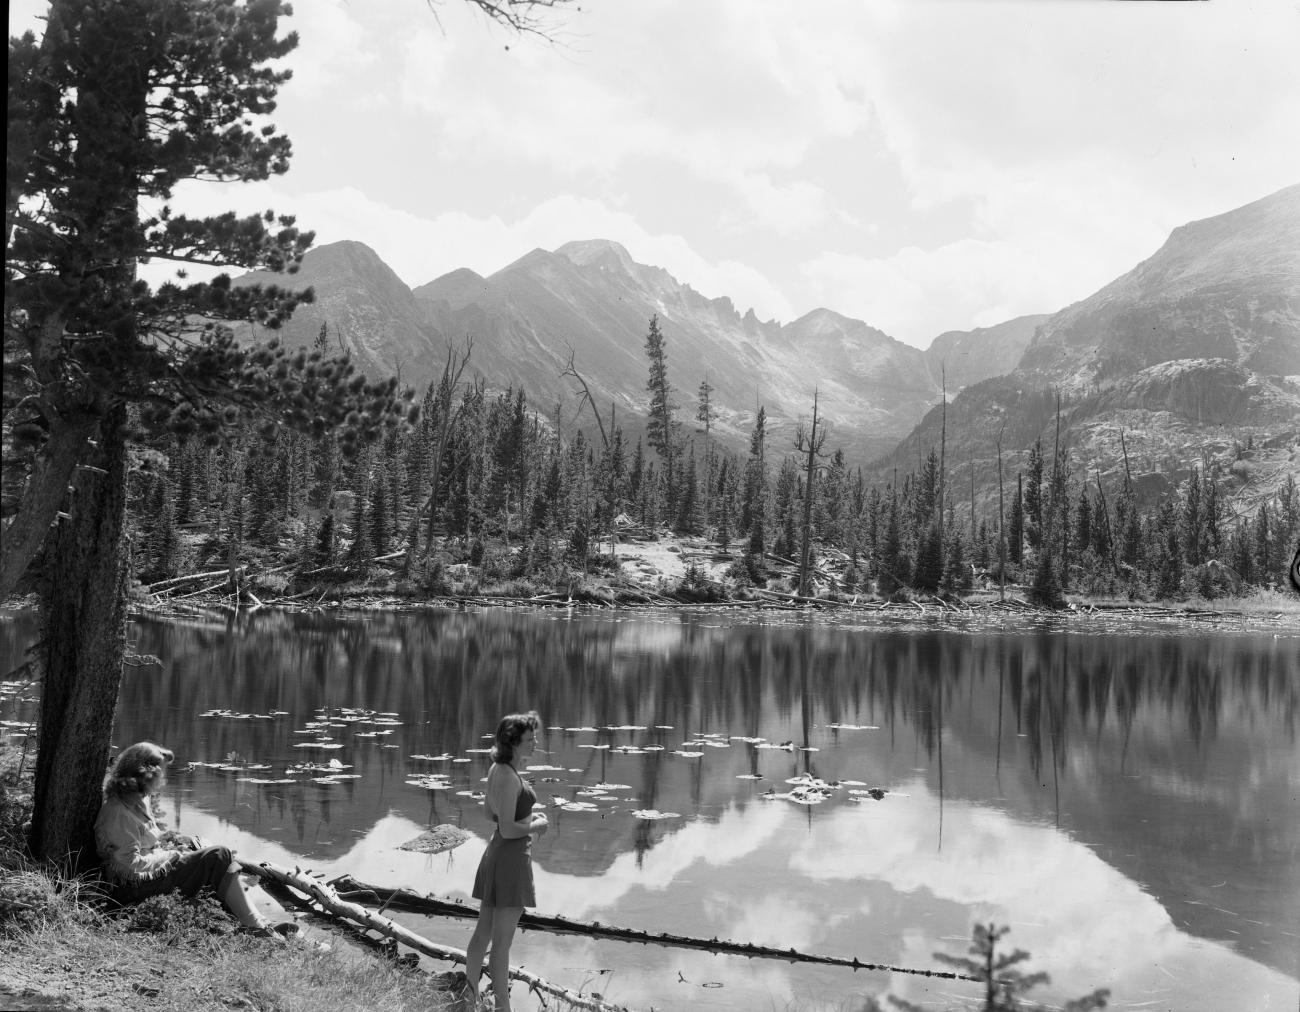 Two women on the bank of Nymph Lake in Rocky Mountain National Park, framed by trees and mountain peaks.